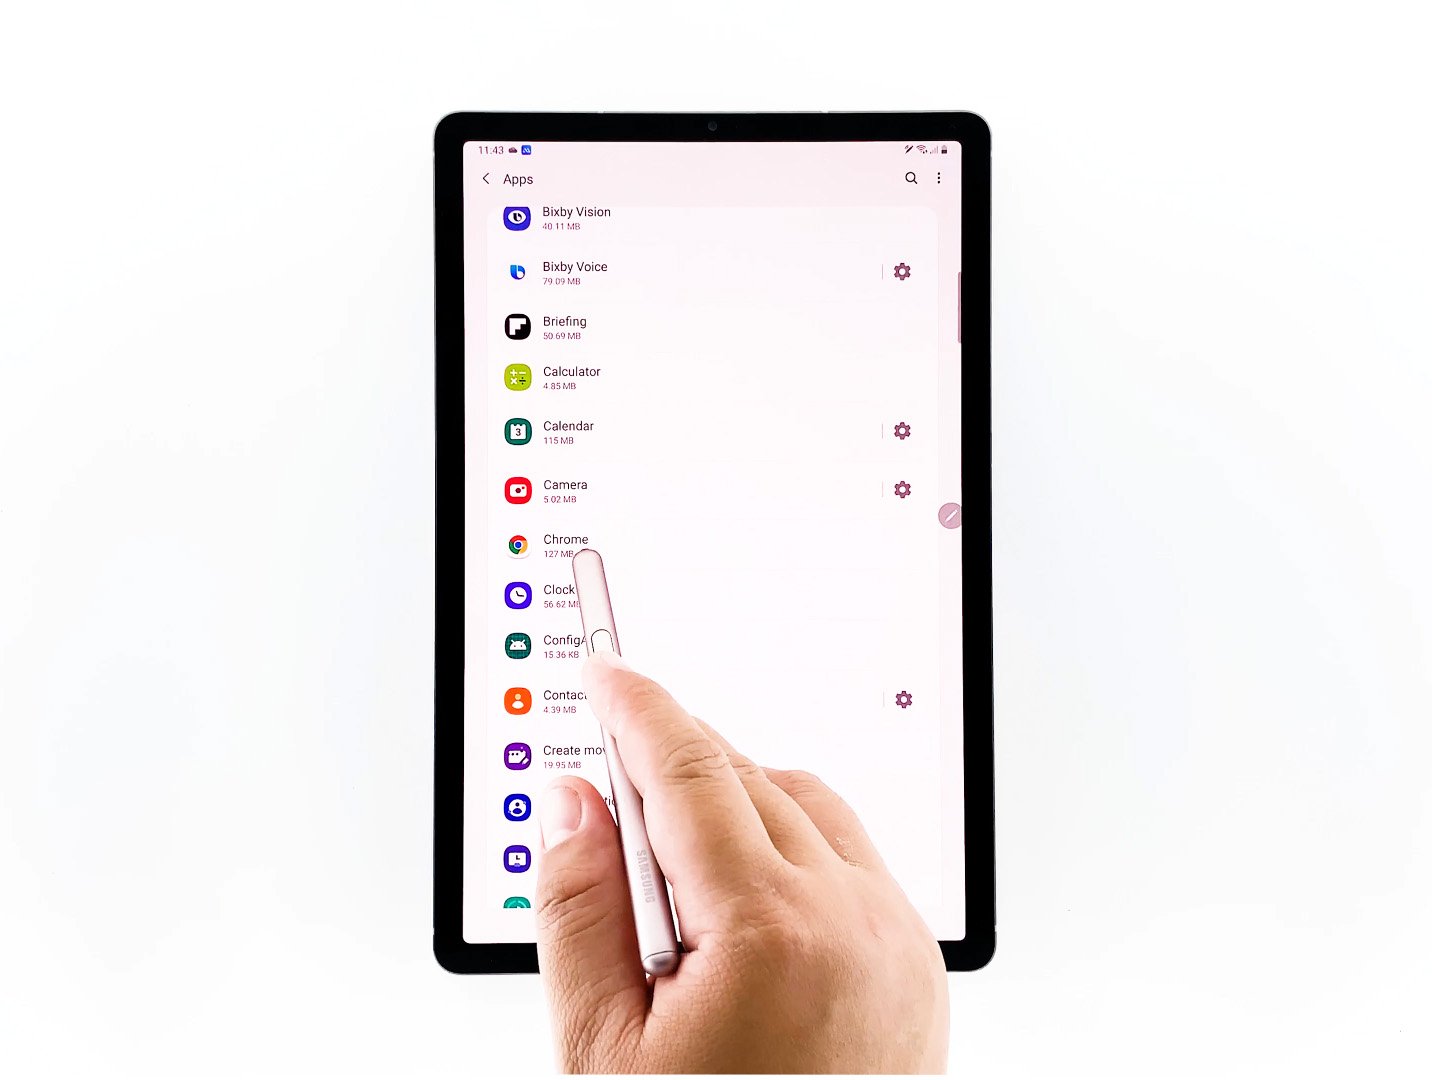 force stop apps galaxy tab s6 - select chrome